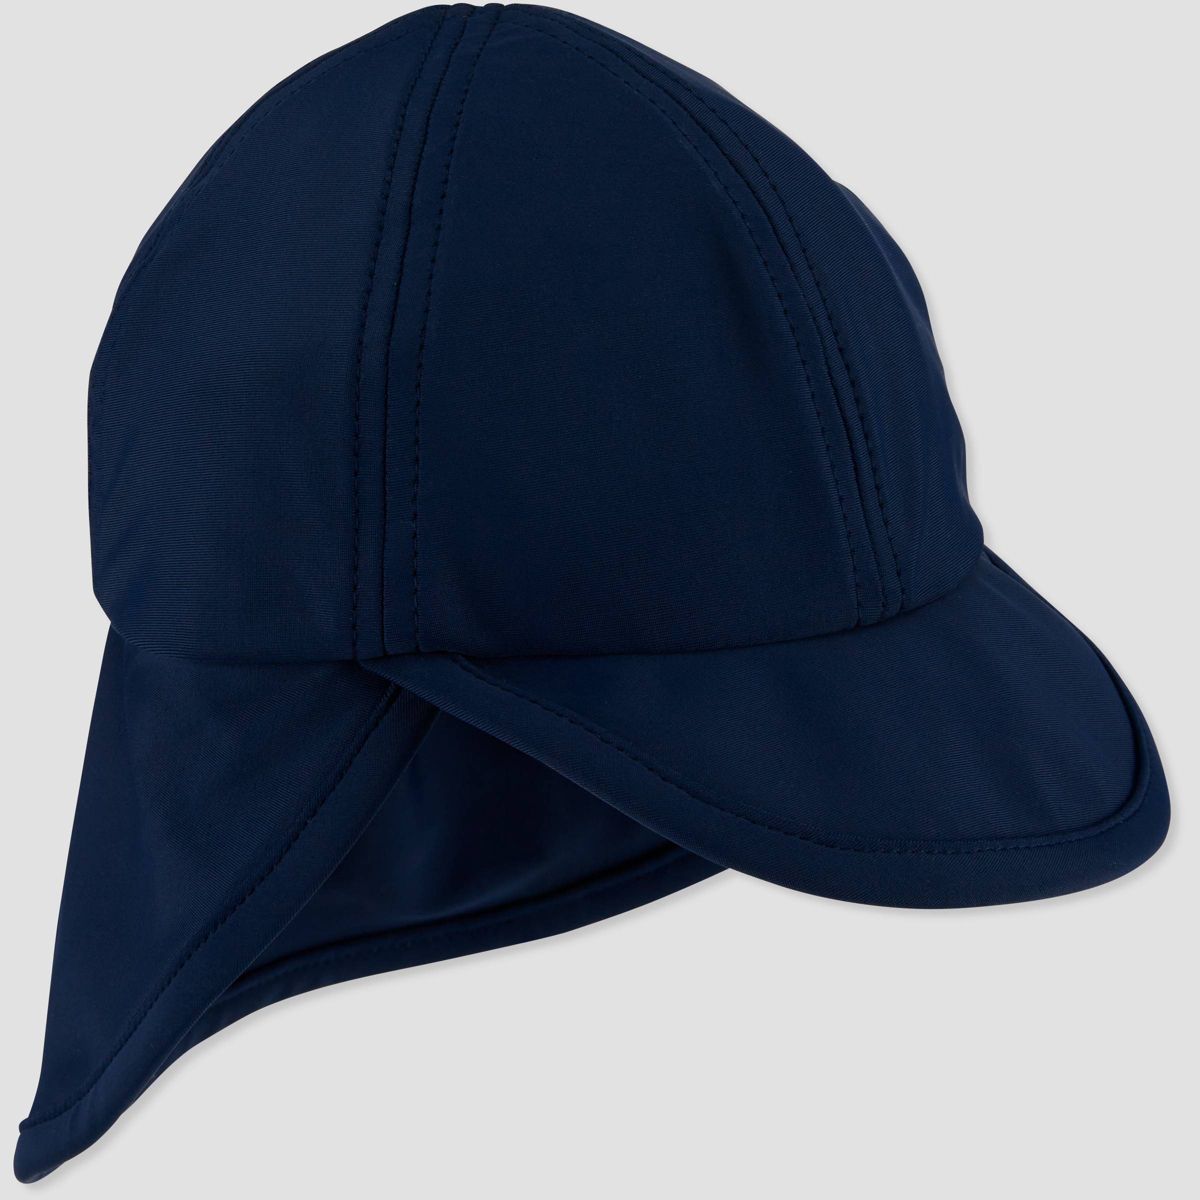 Carter's Just One You®️ Baby Boys' Solid Sun Hat - Navy Blue | Target